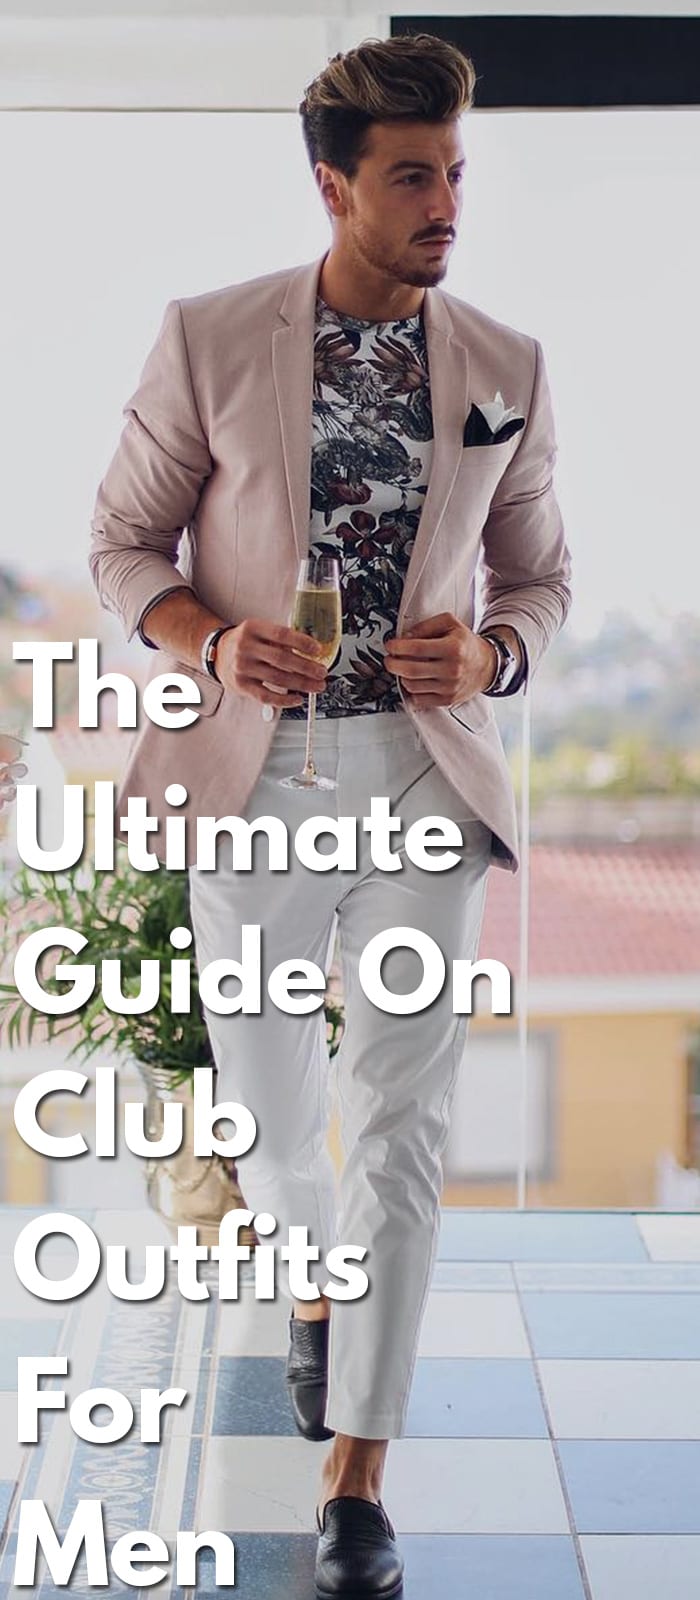 The-Ultimate-Guide-On-Club-Outfits-For-Men.